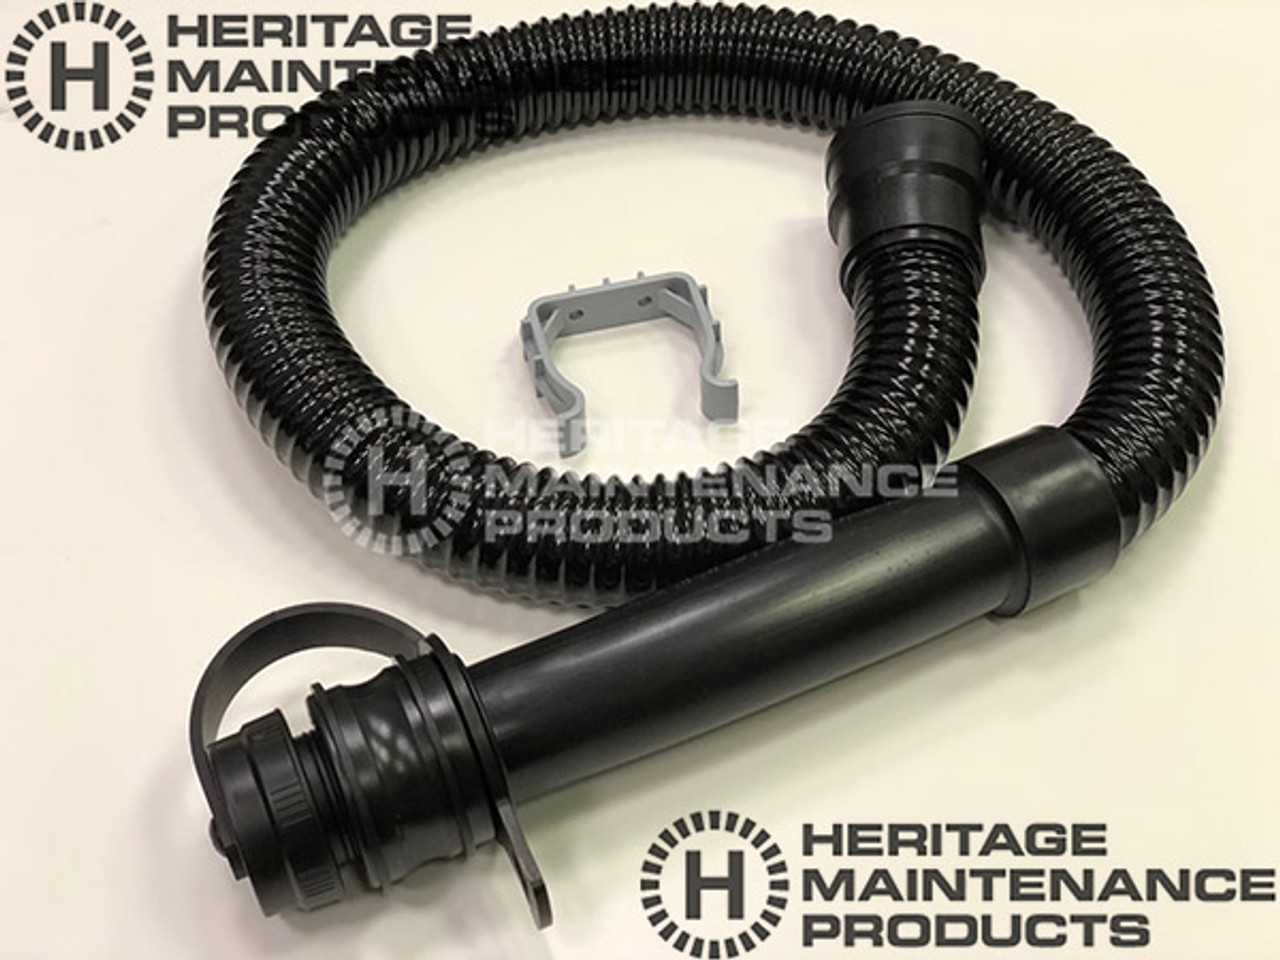 AD 56601412 Drain Hose Kit for Nilfisk Advance. Priced Each. Replaces Nilfisk Advance 56601412. Our Part Number AD 56601412